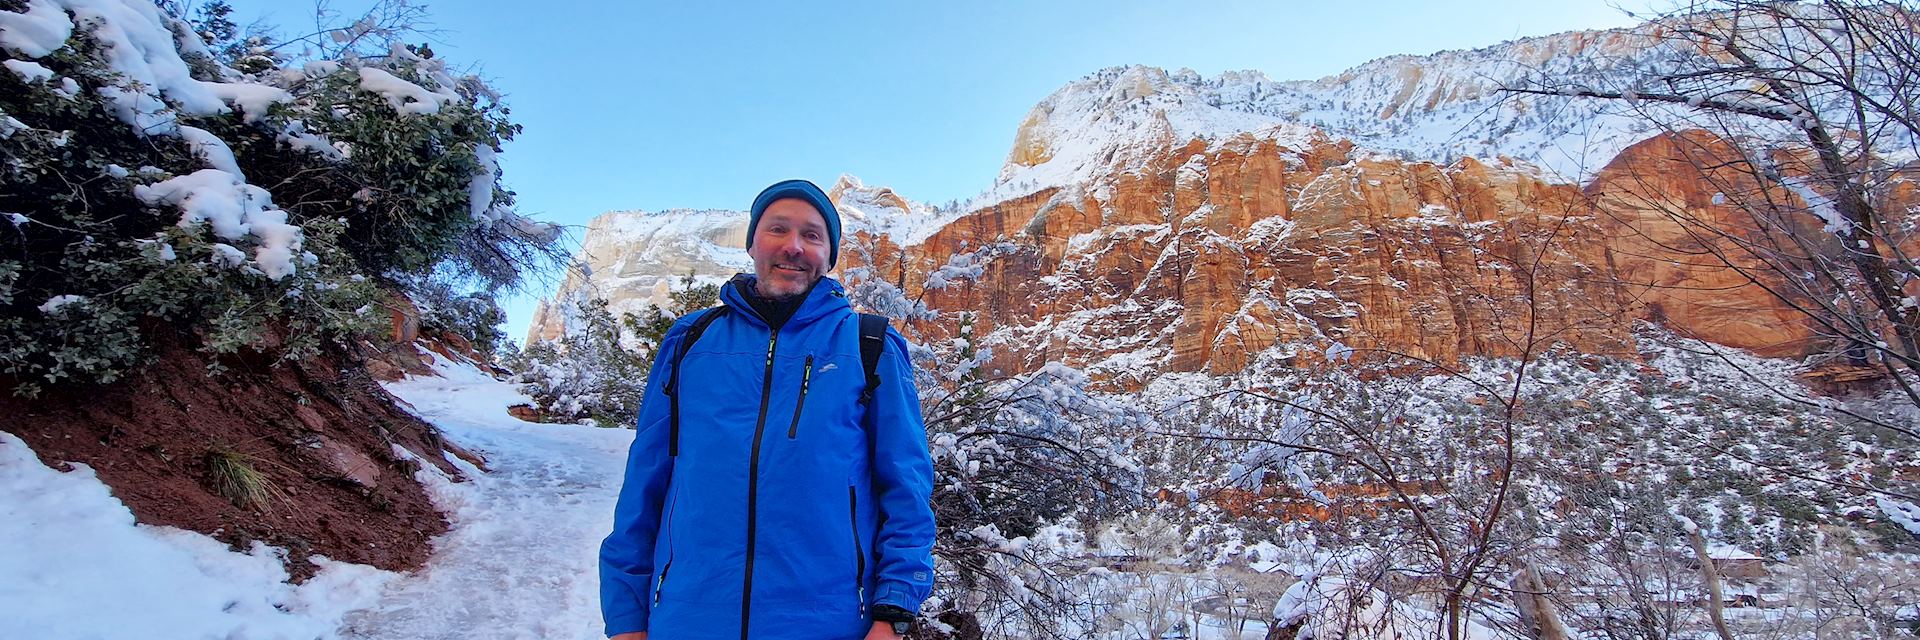 Tom in Zion National Park, USA